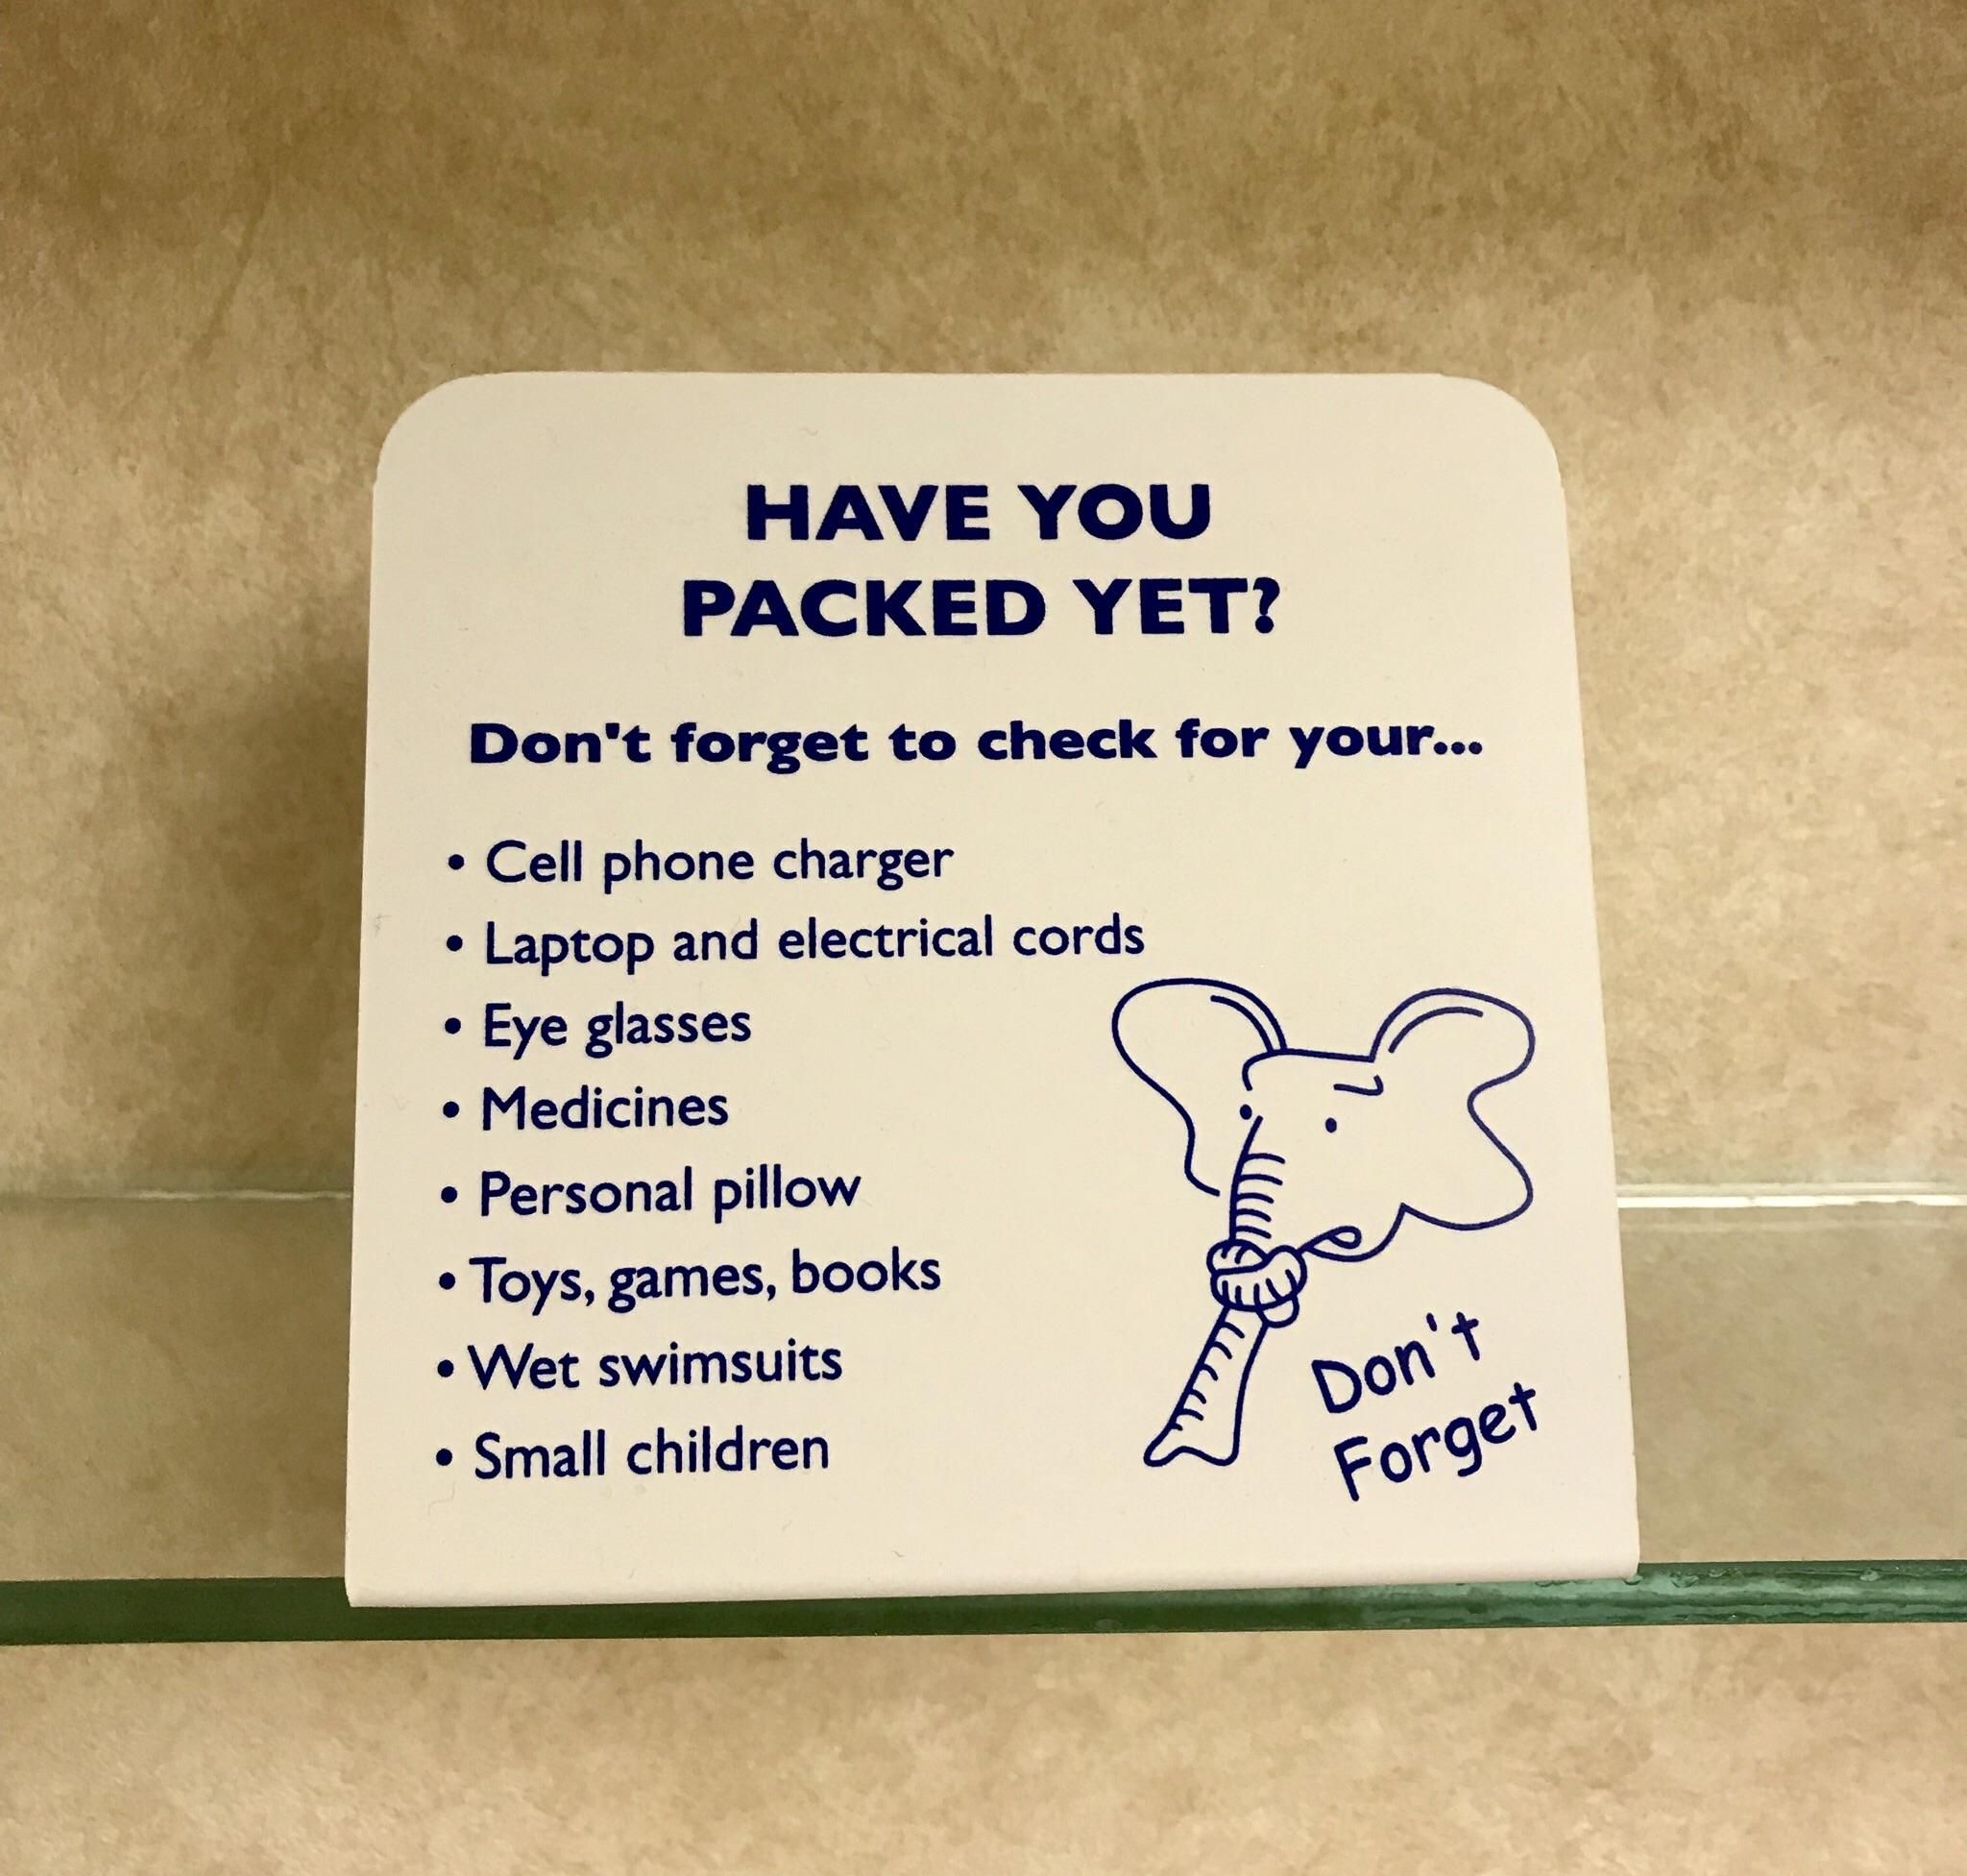 The hotel I stayed reminds customers not to leave commonly forgotten items.